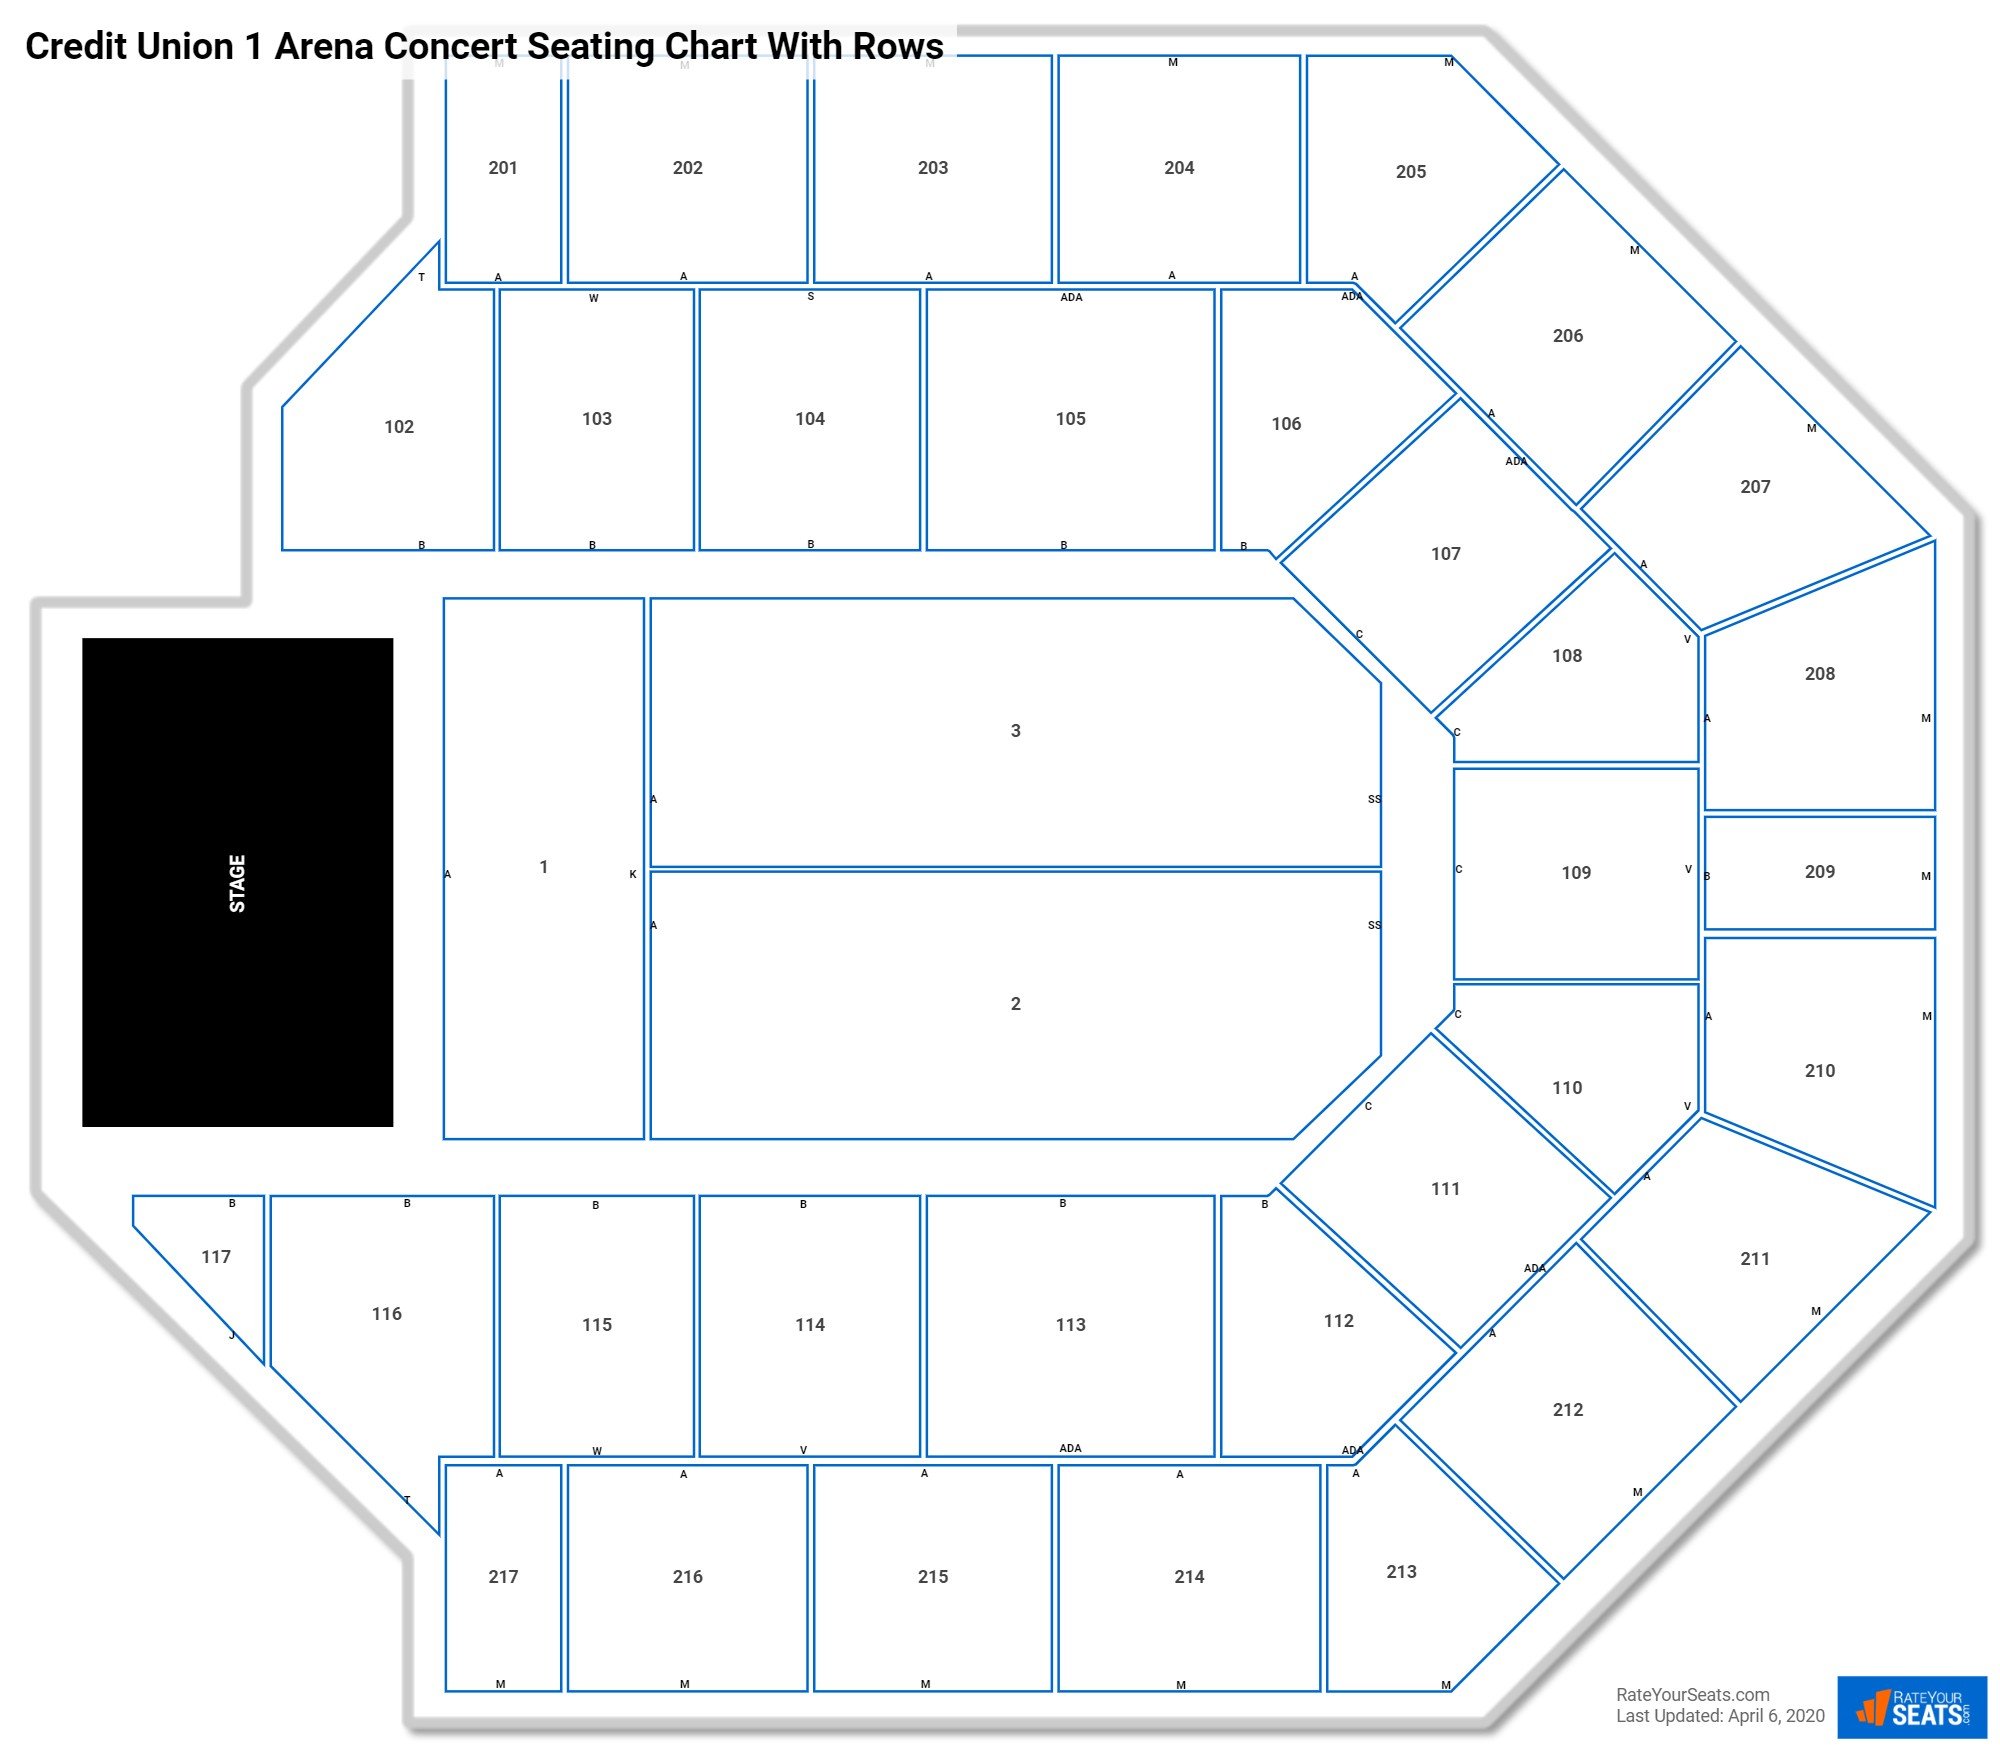 Credit Union 1 Arena seating chart with row numbers